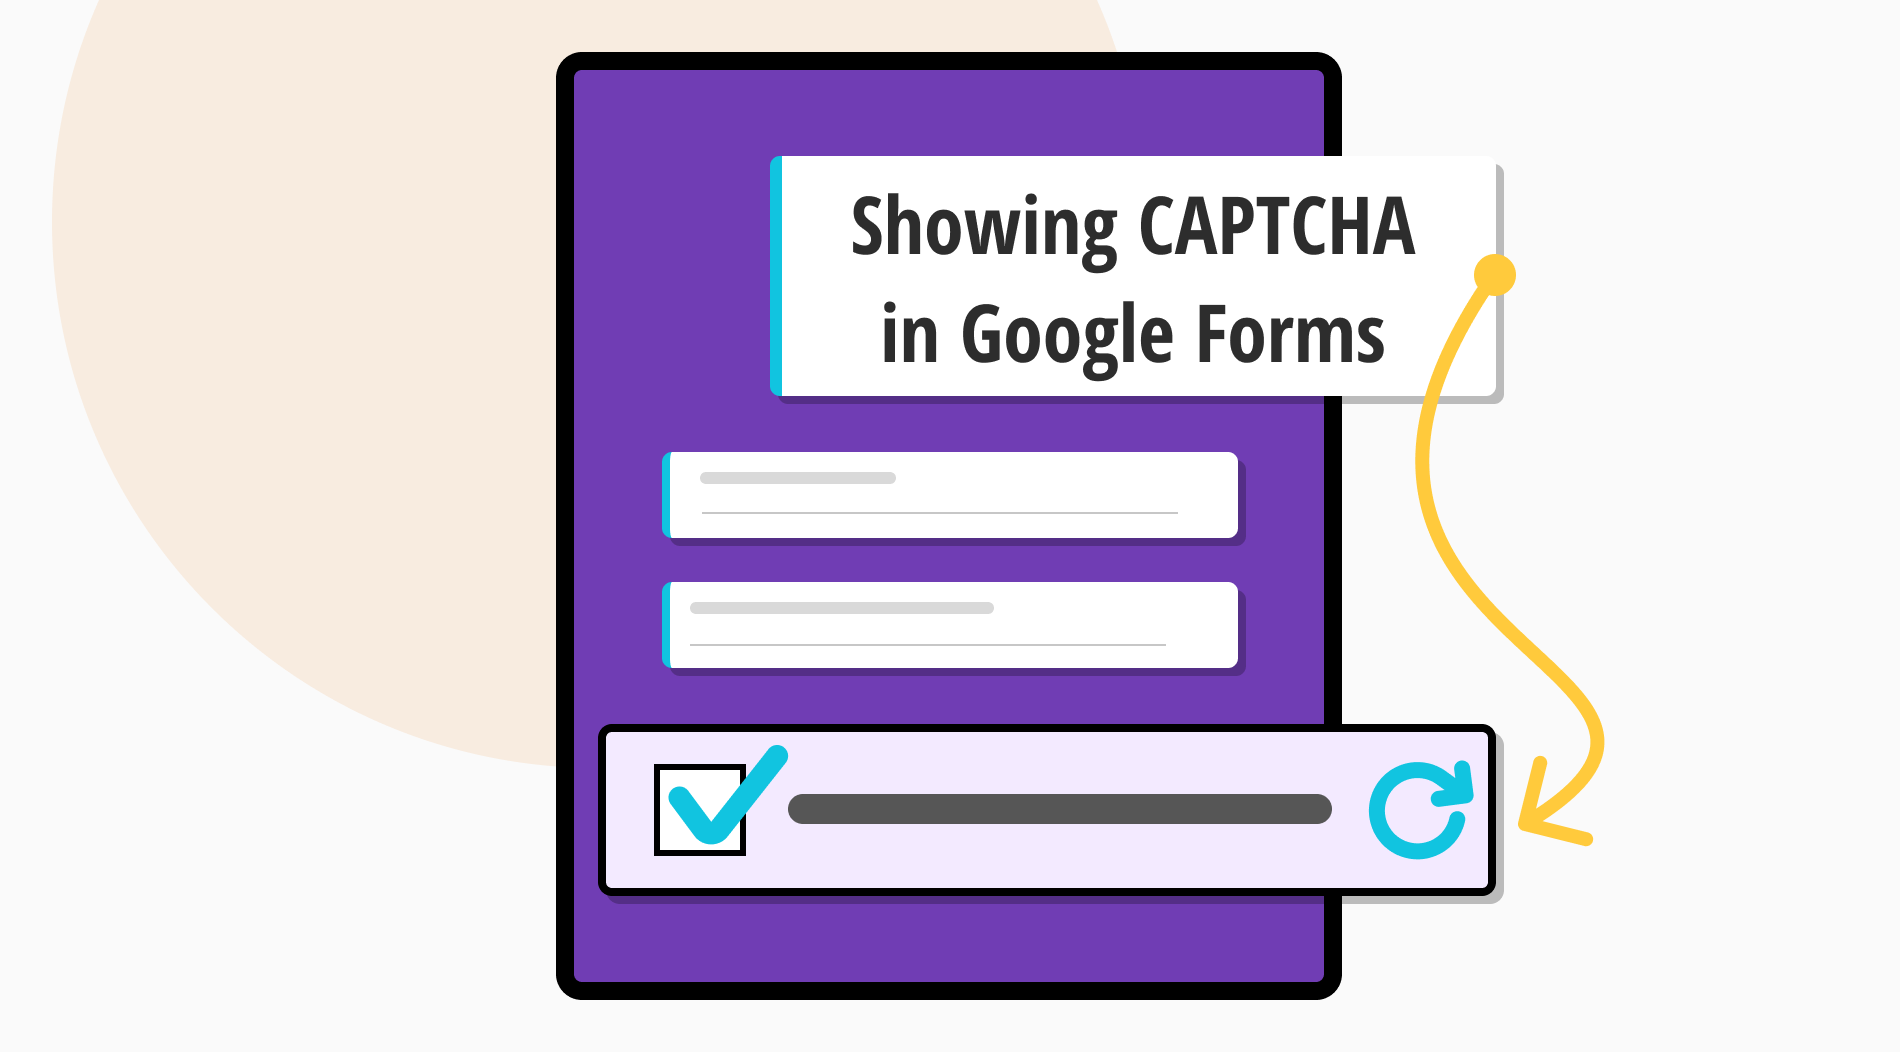 How to show CAPTCHA in Google Forms